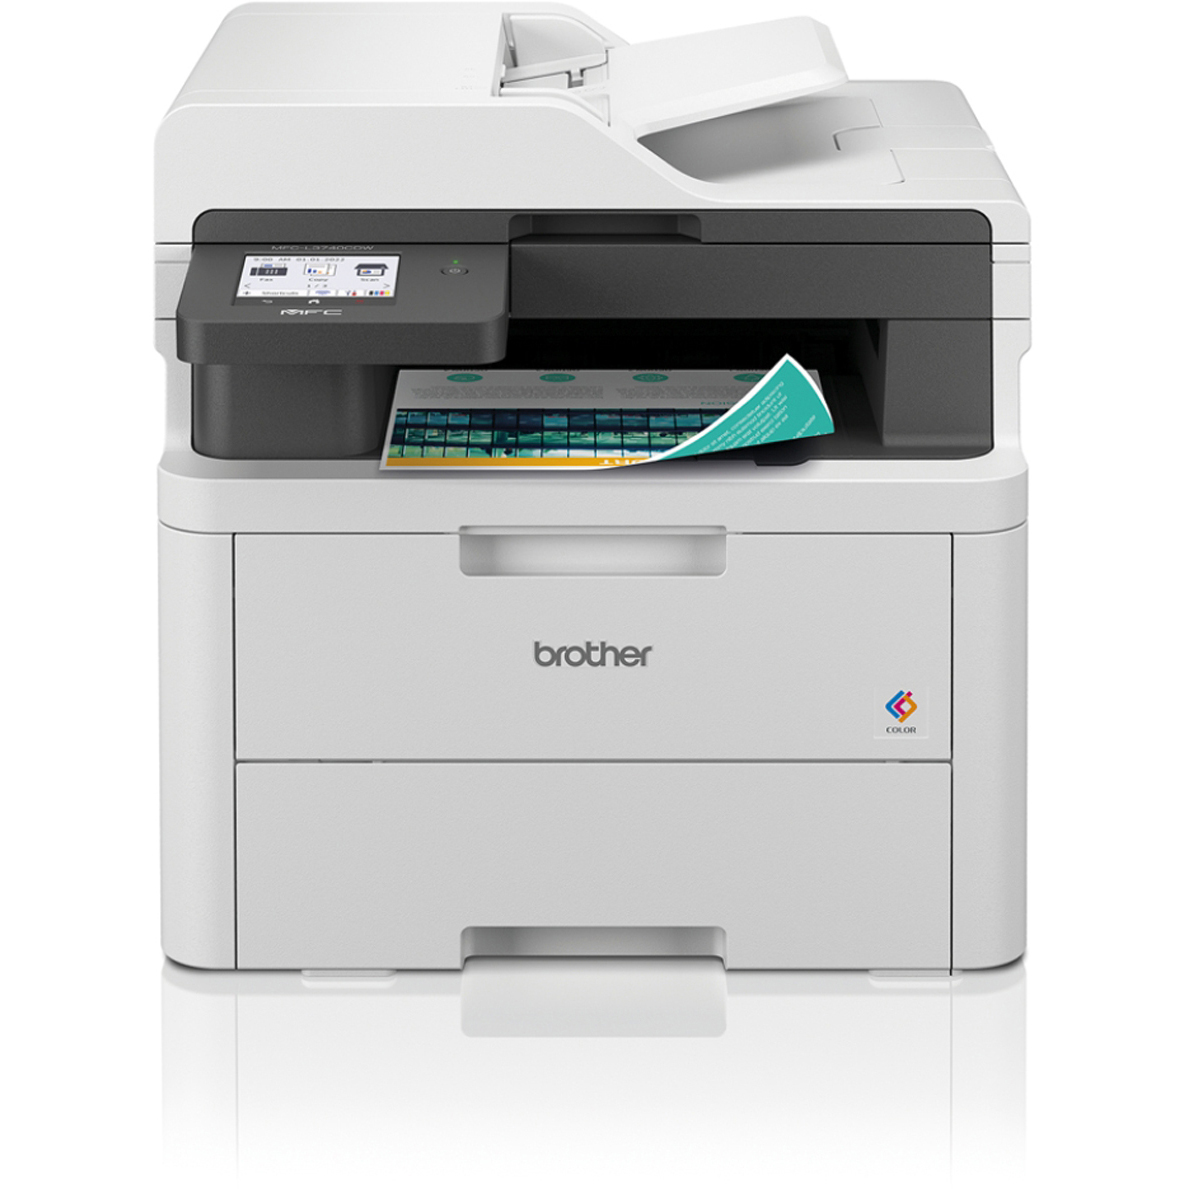 Original Brother Mfc-L3740Cdw A4 Colour Wireless Led Multifunction Laser Printer (MFCL3740CDWZU1)